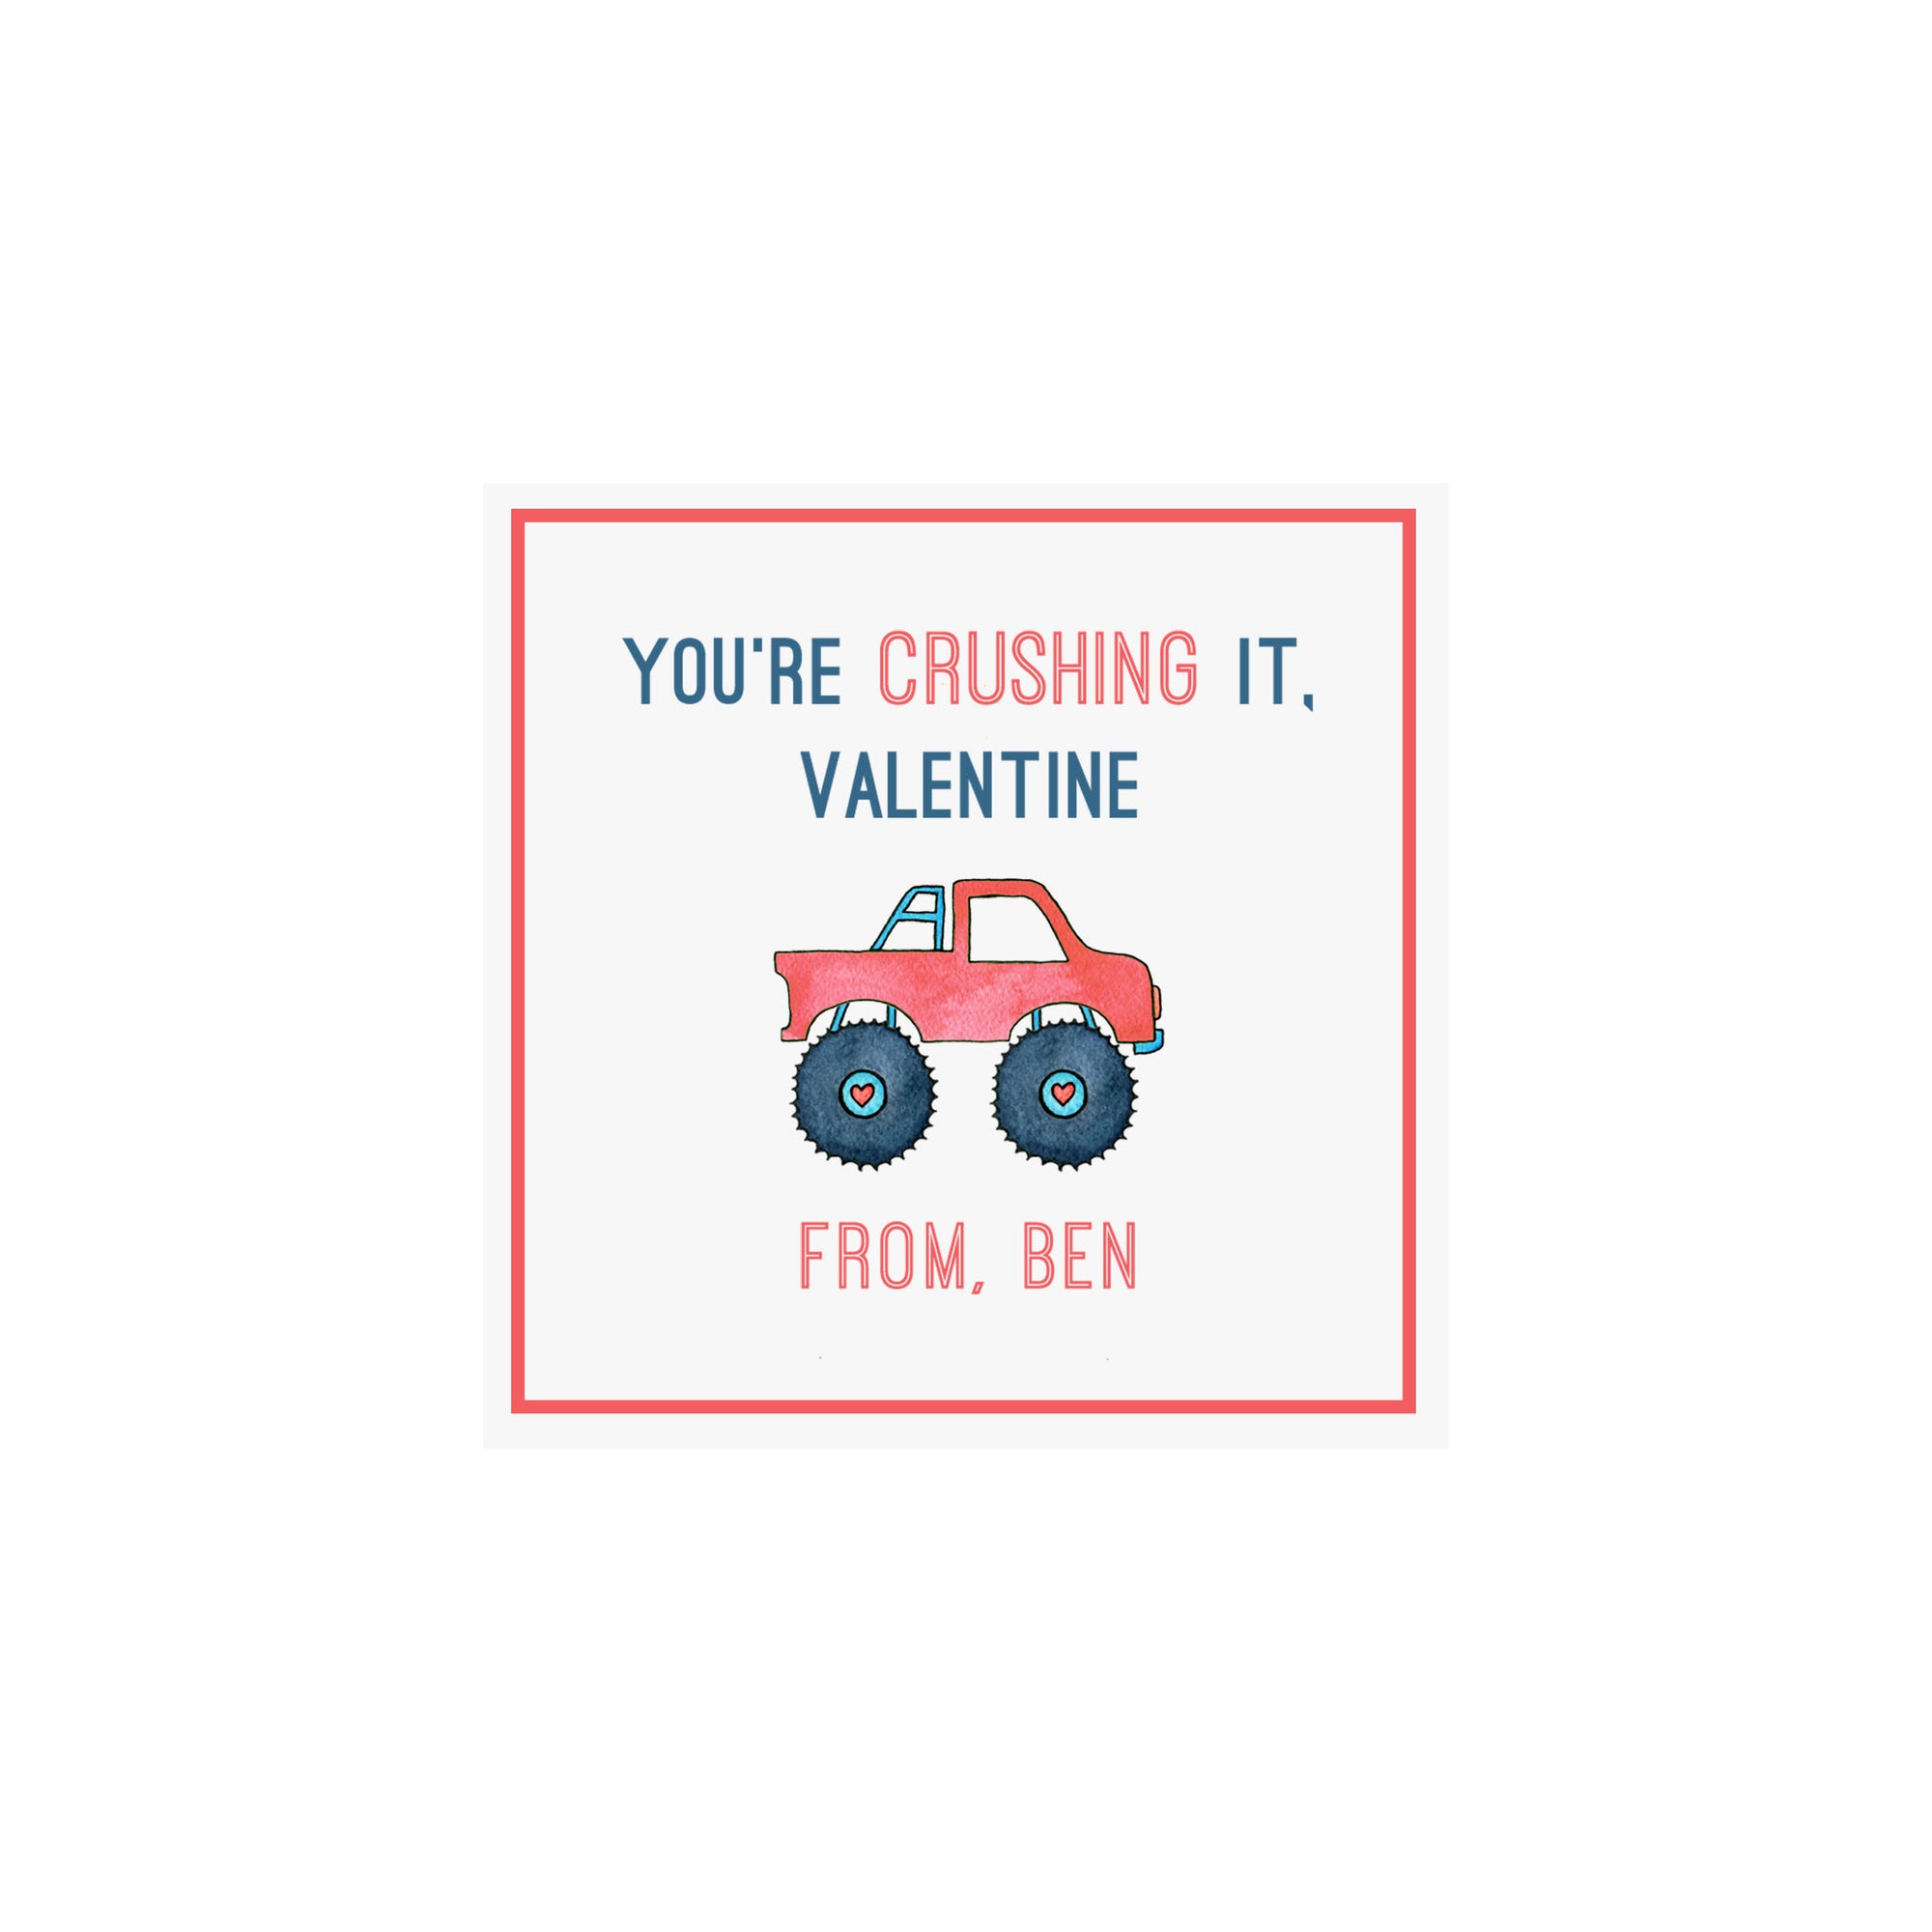 Race Car Valentine Stickers for Kids Printable Valentine Car Tags for  Classroom, Editable Personalized School Labels instant Download 